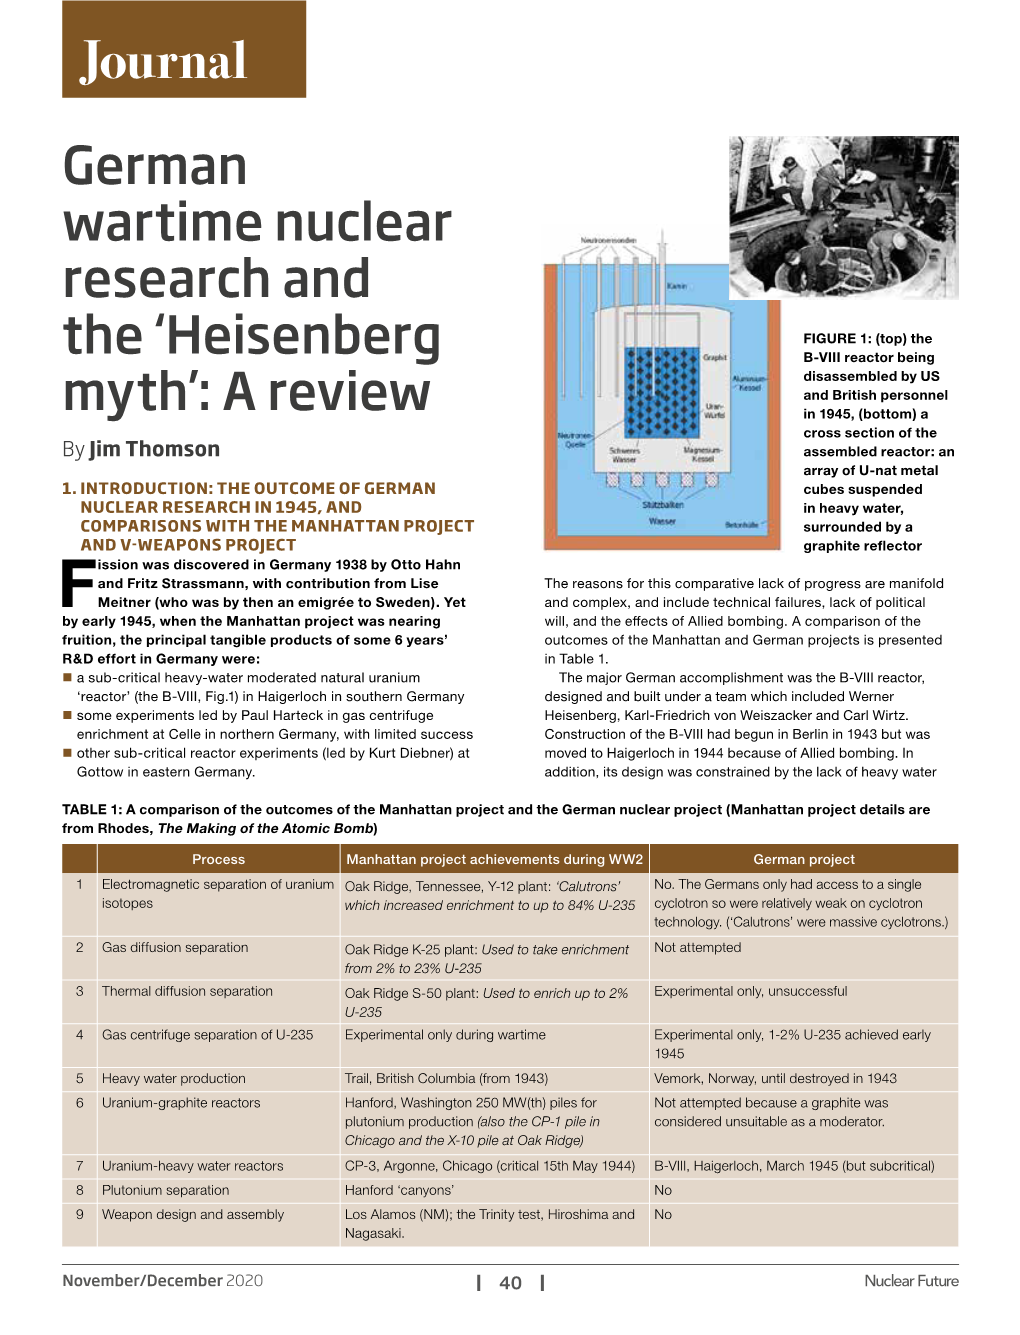 German Wartime Nuclear Research And